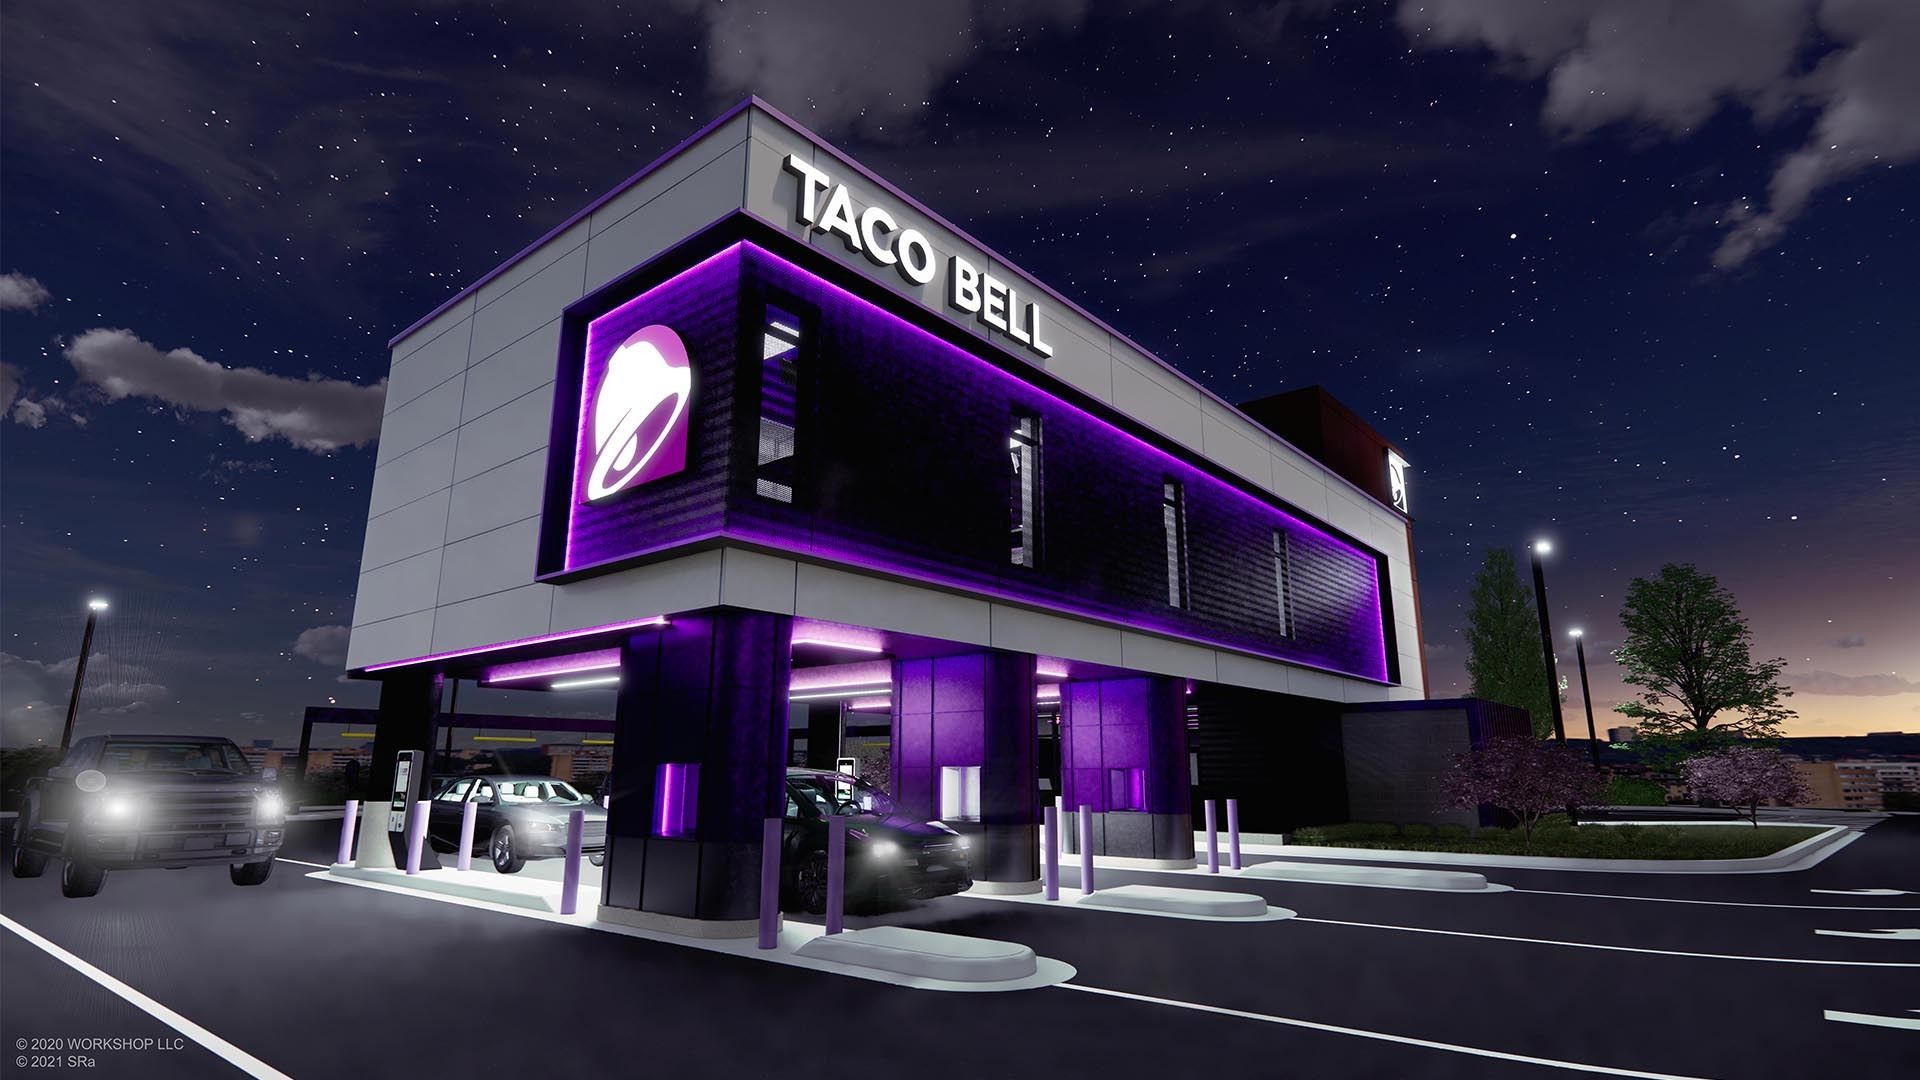 Image of a new Taco Bell restaurant design, with 4 drive-thru lanes under the kitchen. 